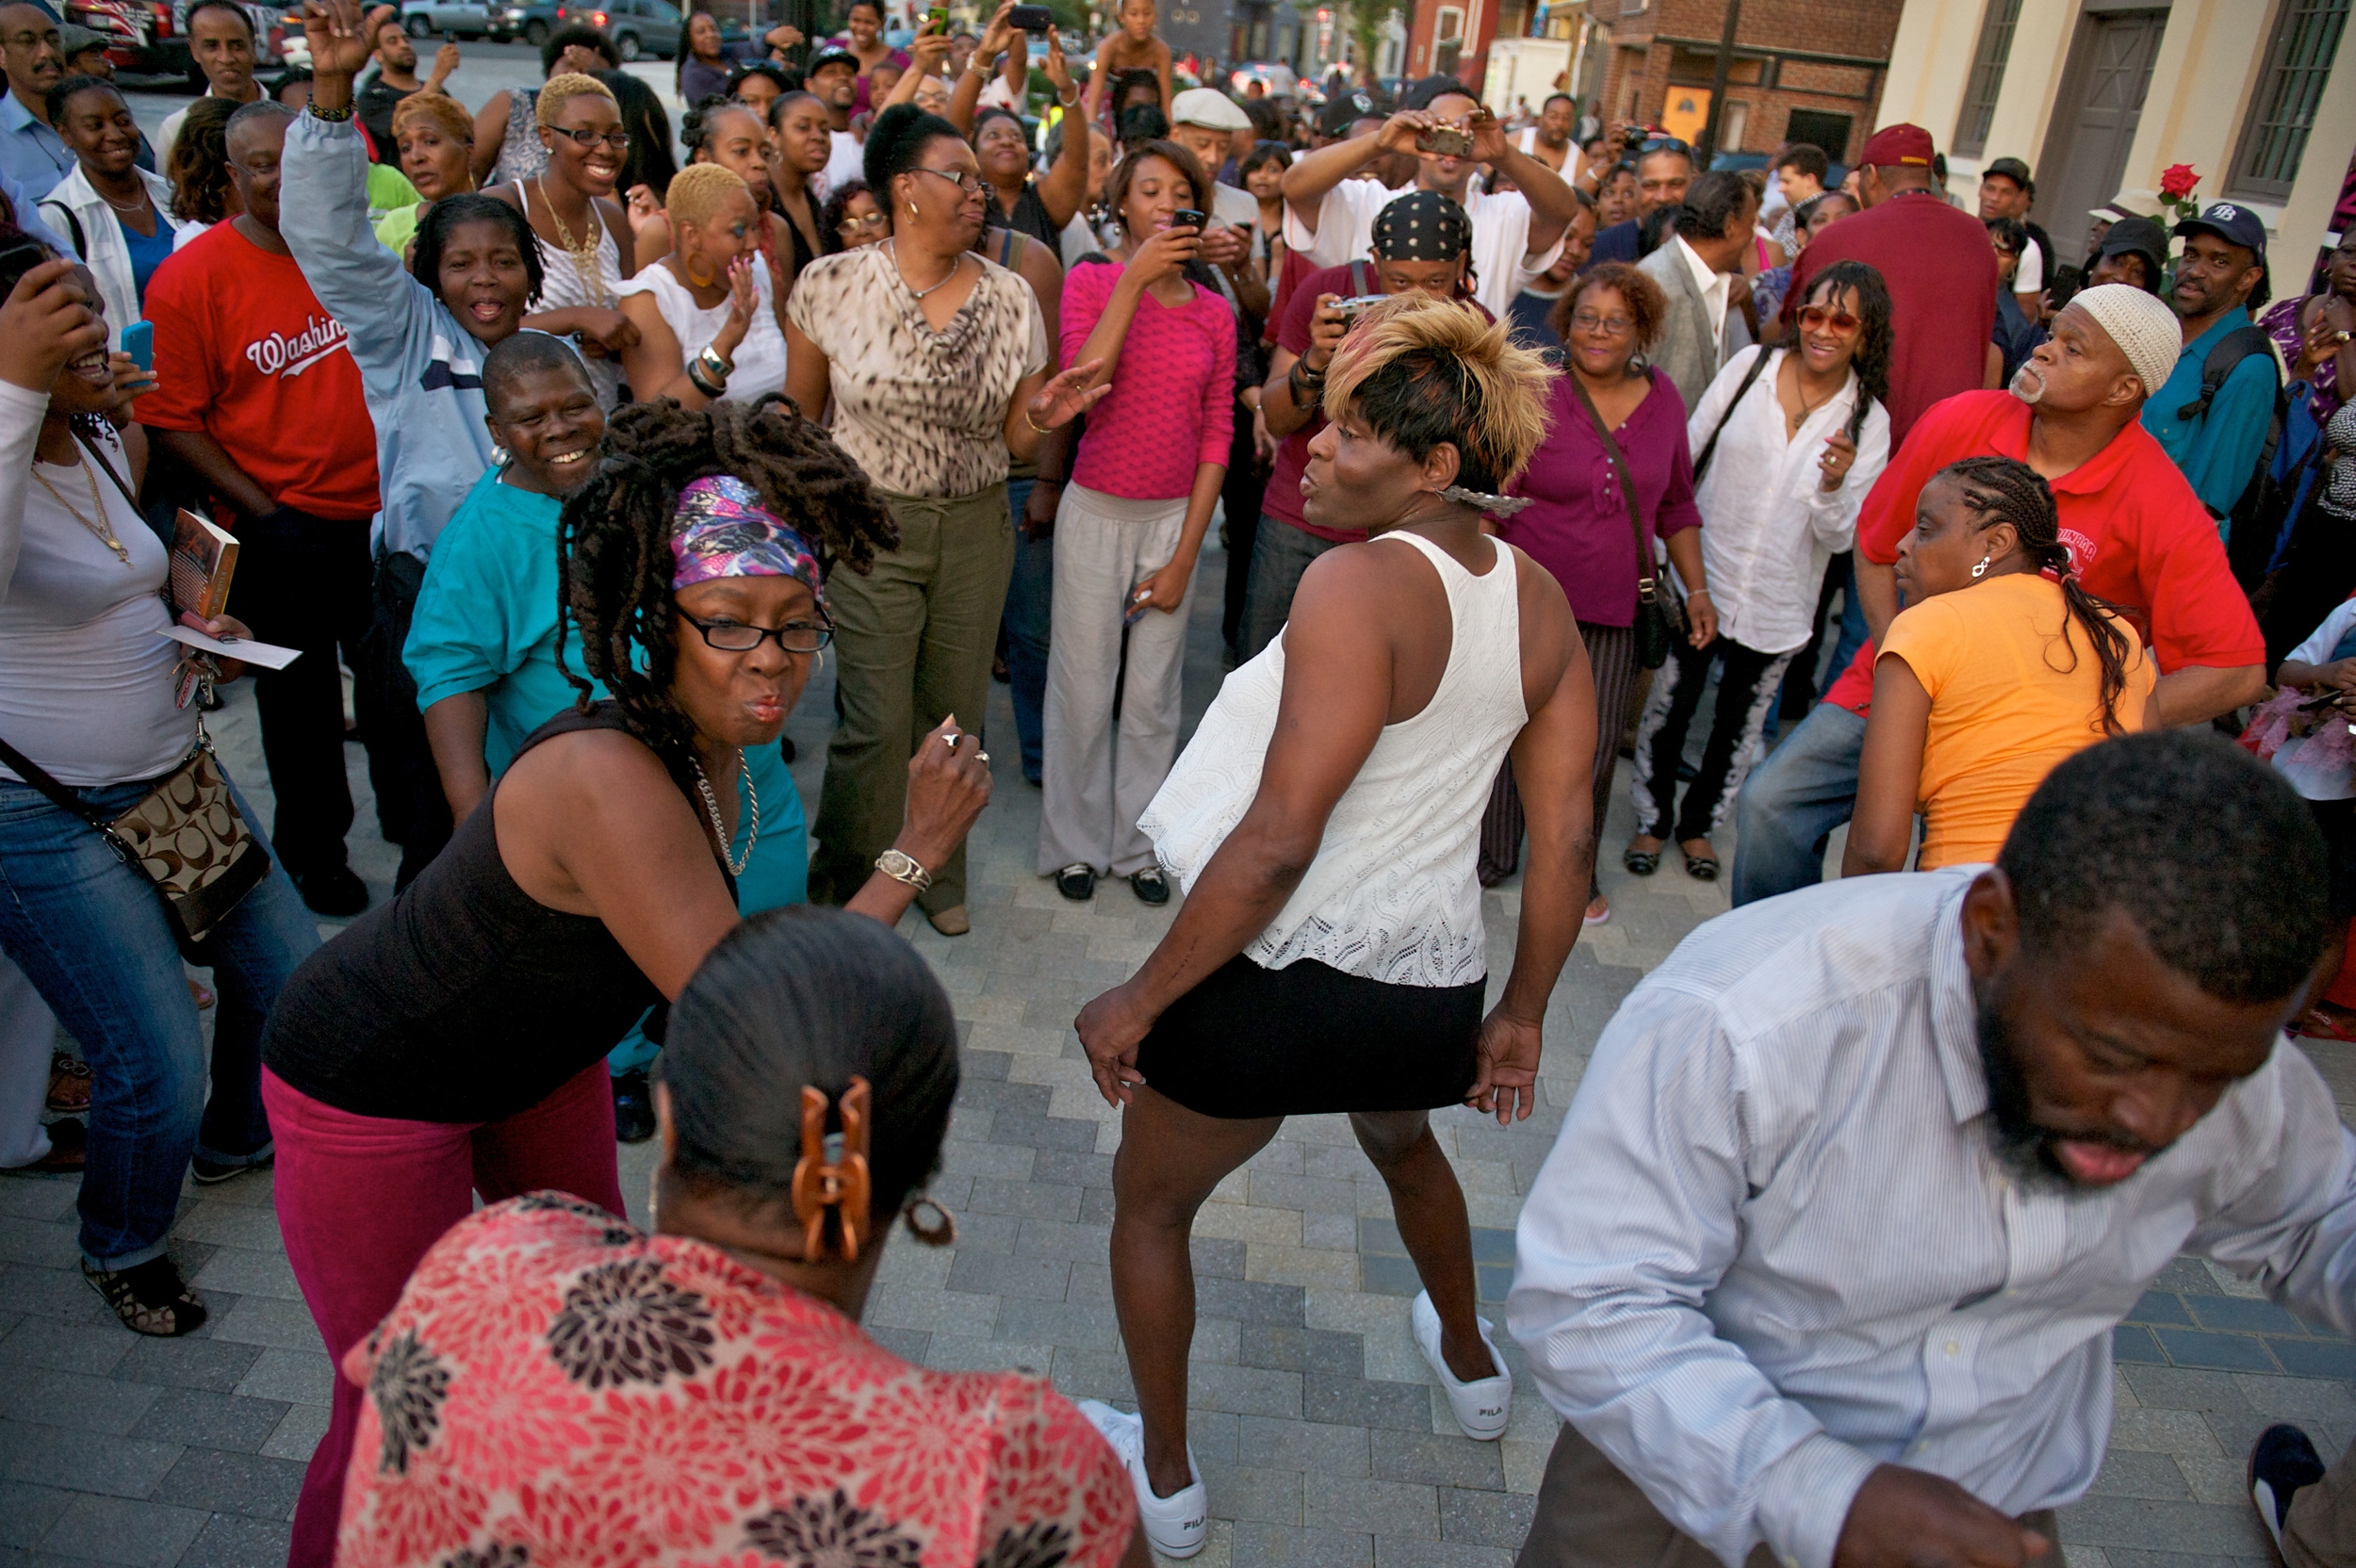   DC residents dance as they celebrate Chuck Brown outside Howard Theatre. A big celebration broke out the night of Chuck Brown's death.(Photo by Marlon Correa/The Washington Pos  )  